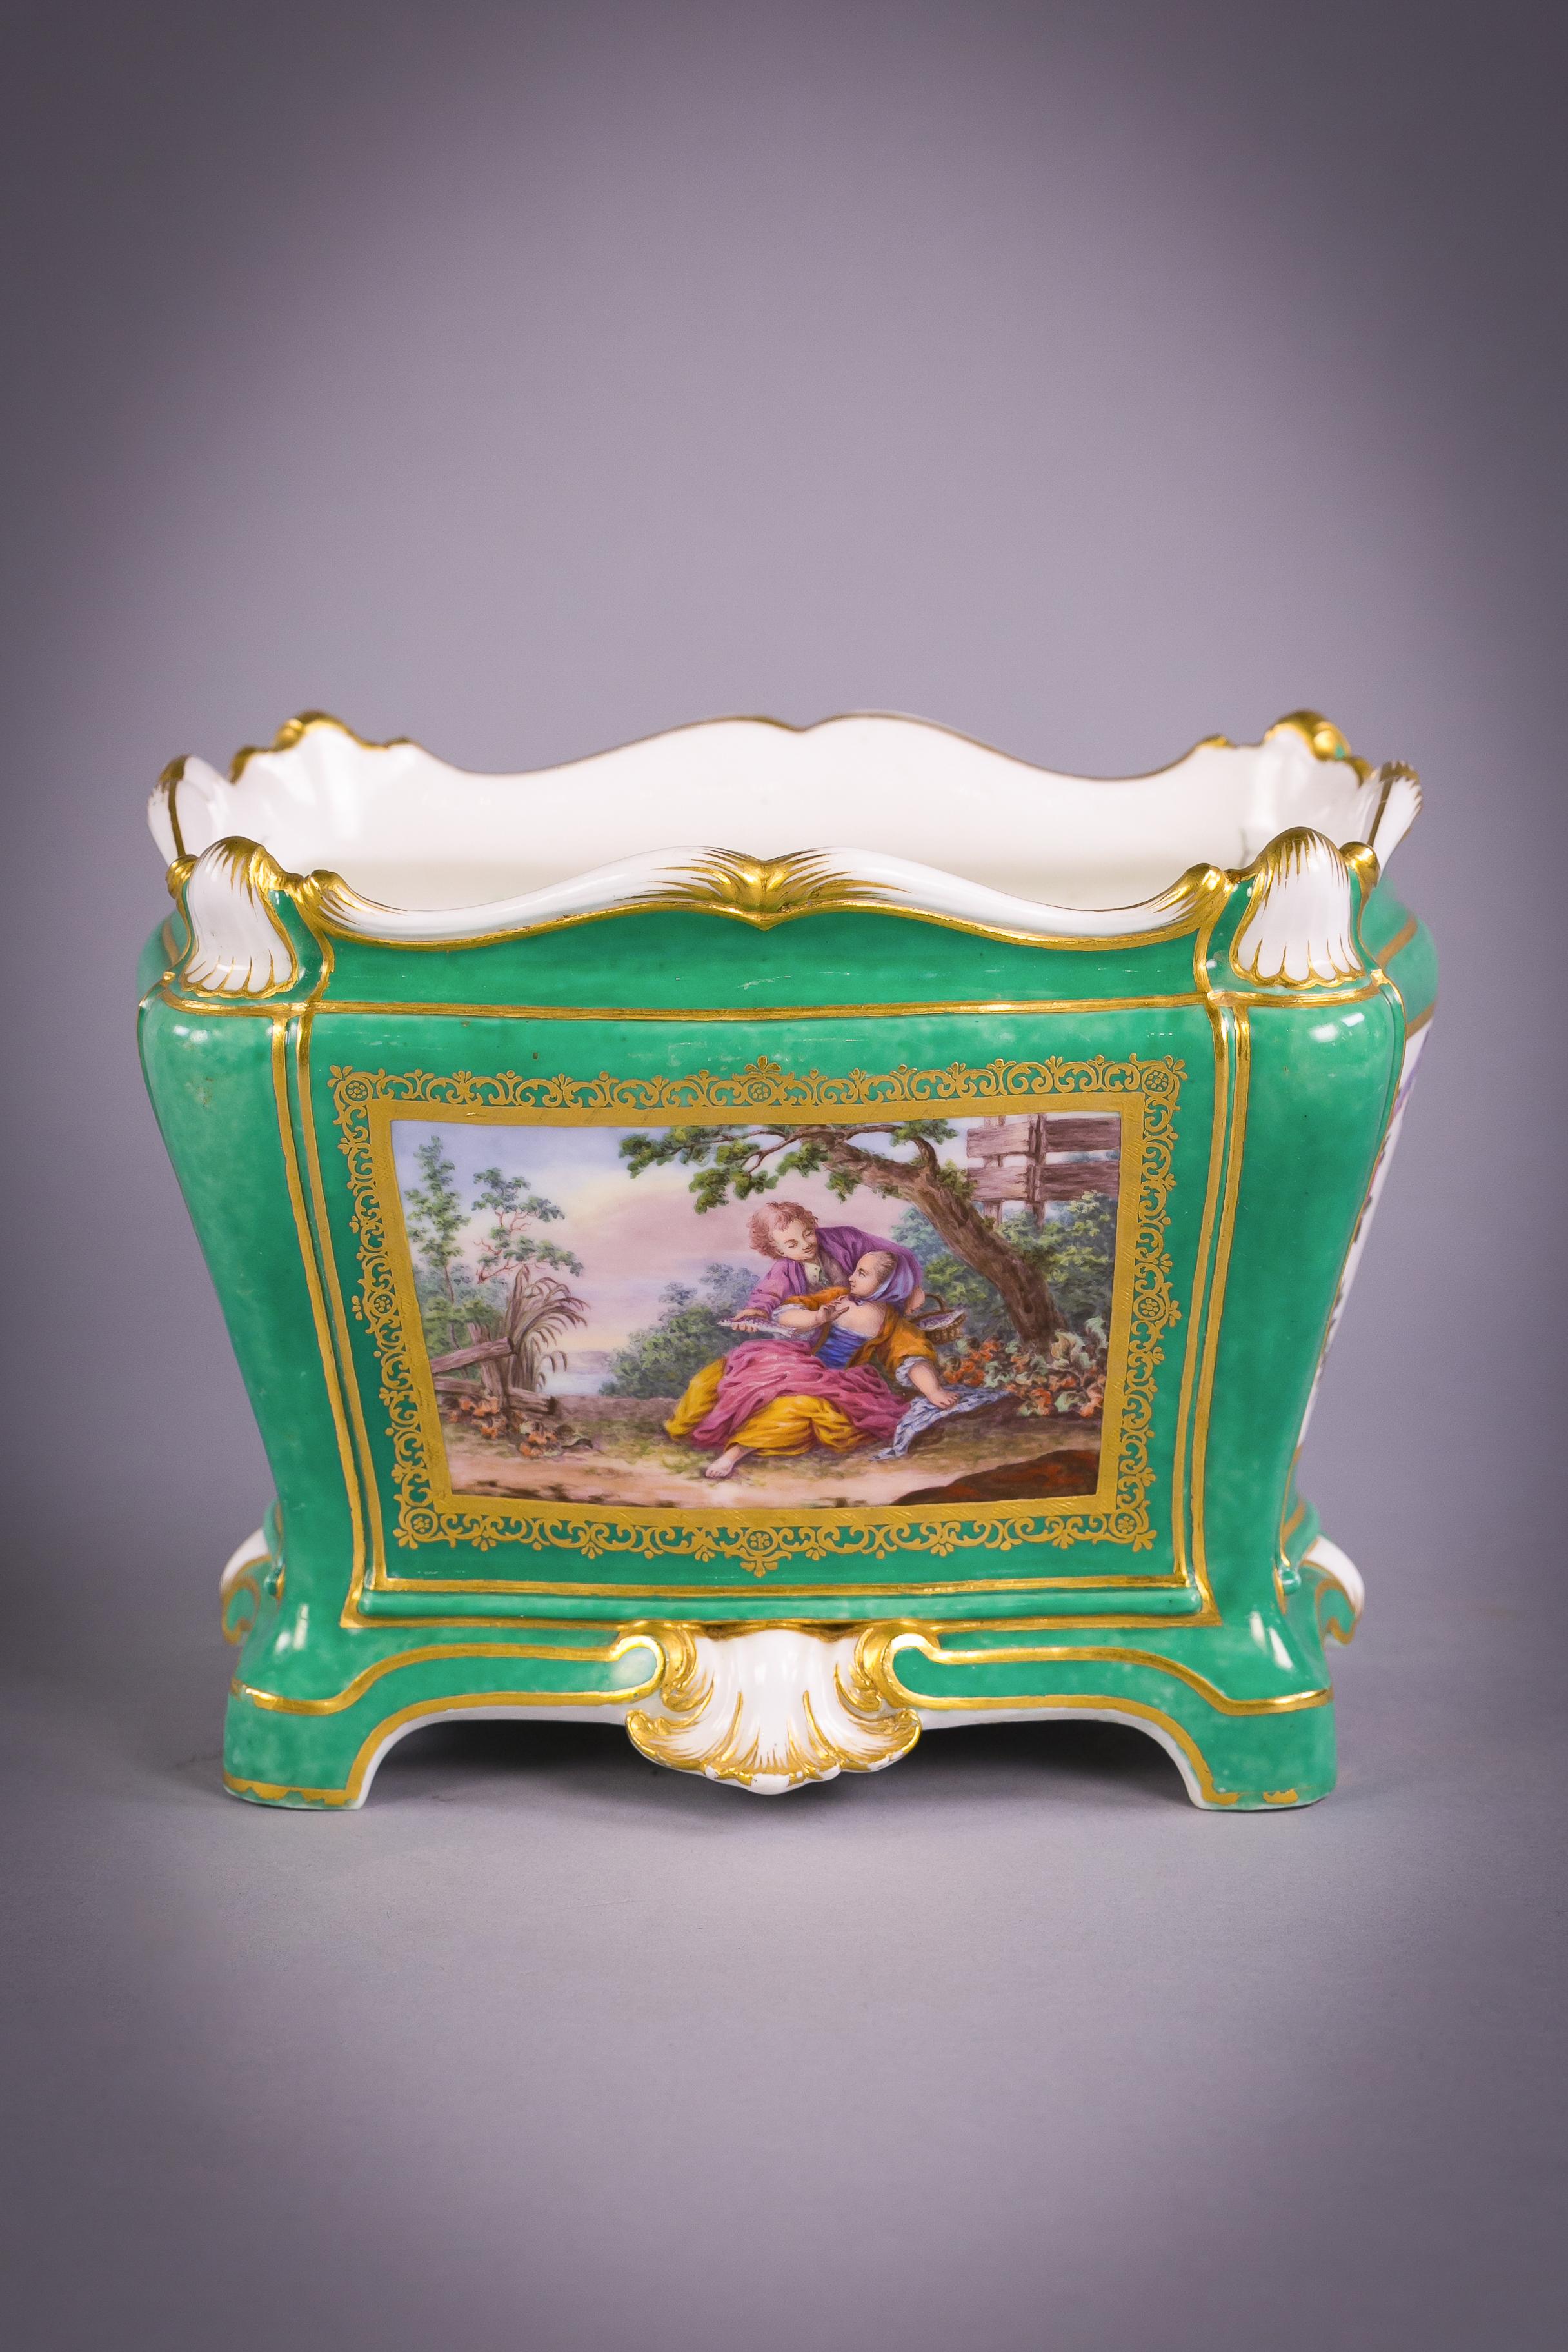 Also known as Cuvettes A Fleurs 'A Tombeau', flower bowls 'a tomb'. Meticulously painted with scenes derived from 'La Chasse' and 'La Pesche' by Jean Baptiste Le Prince after pencil and wash drawings by Francois Boucher.